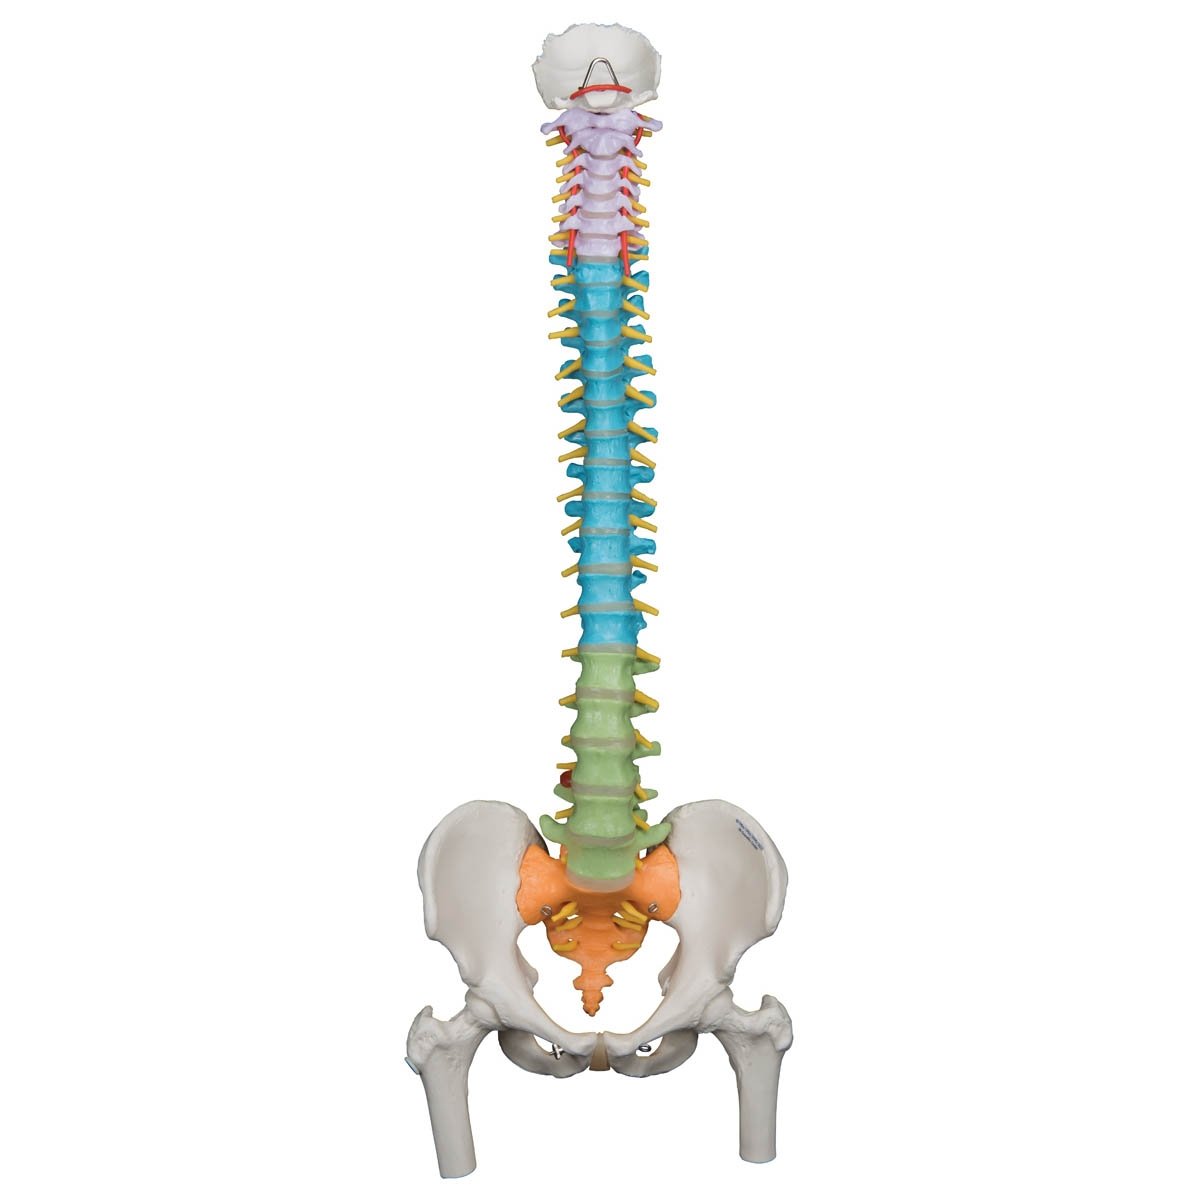 3B Scientific A58/9 Didactic Flexible Spine With Femur Heads 3B Smart Anatomy